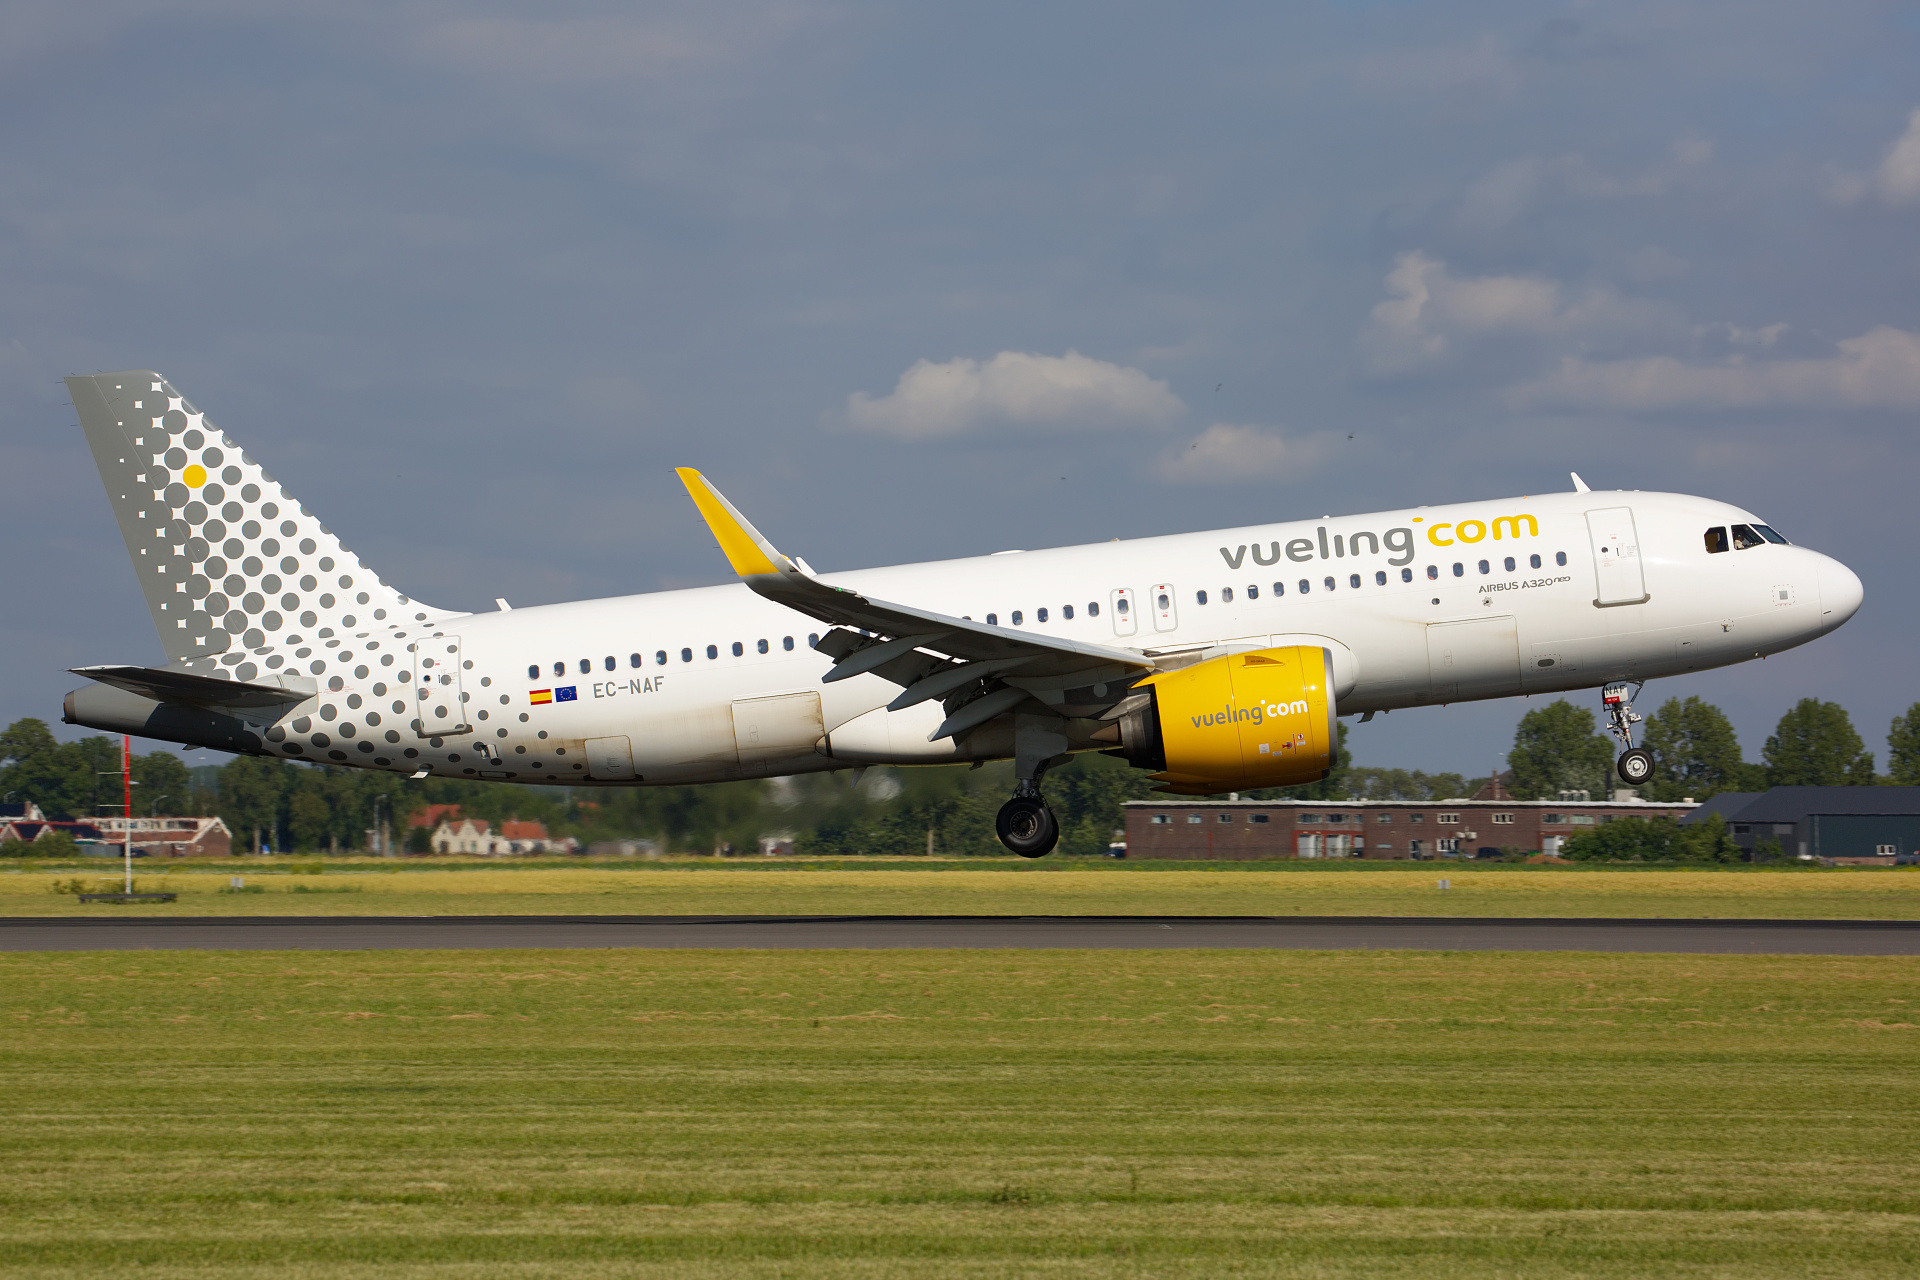 EC-NAF (Aircraft » Schiphol Spotting » Airbus A320neo » Vueling Airlines)